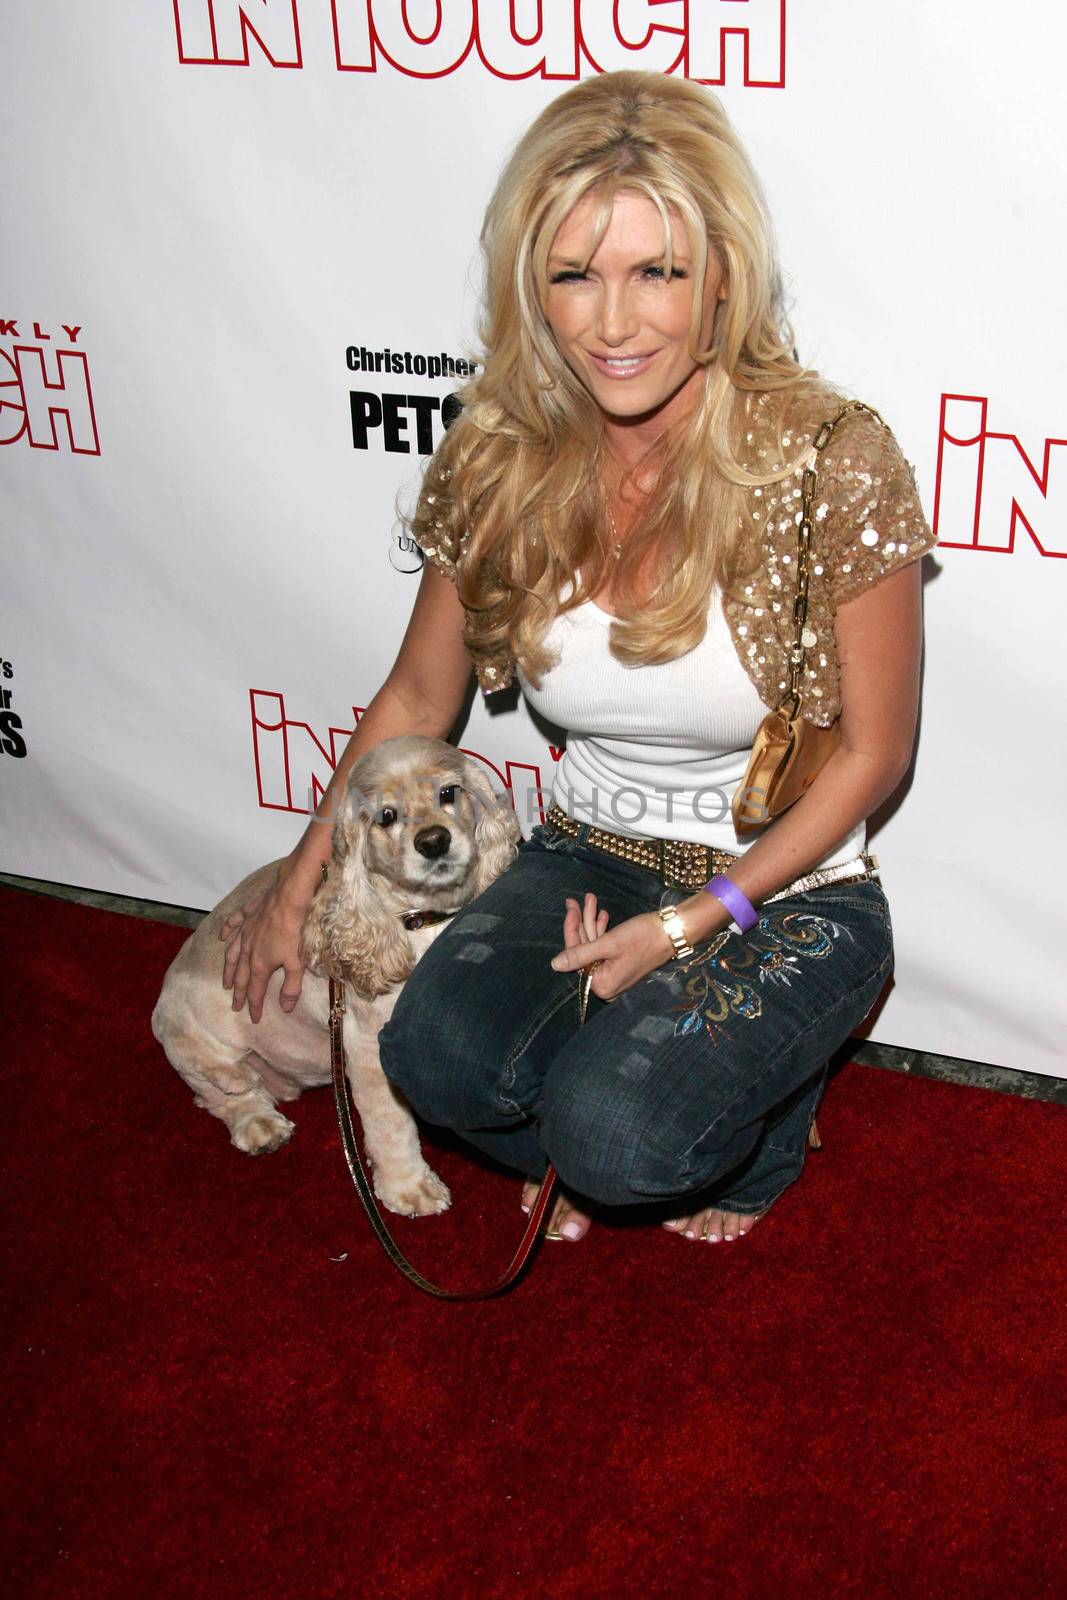 Brande Roderick at the In Touch Presents Pets And Their Stars Party, Cabana Club, Hollywood, CA 09-21-05